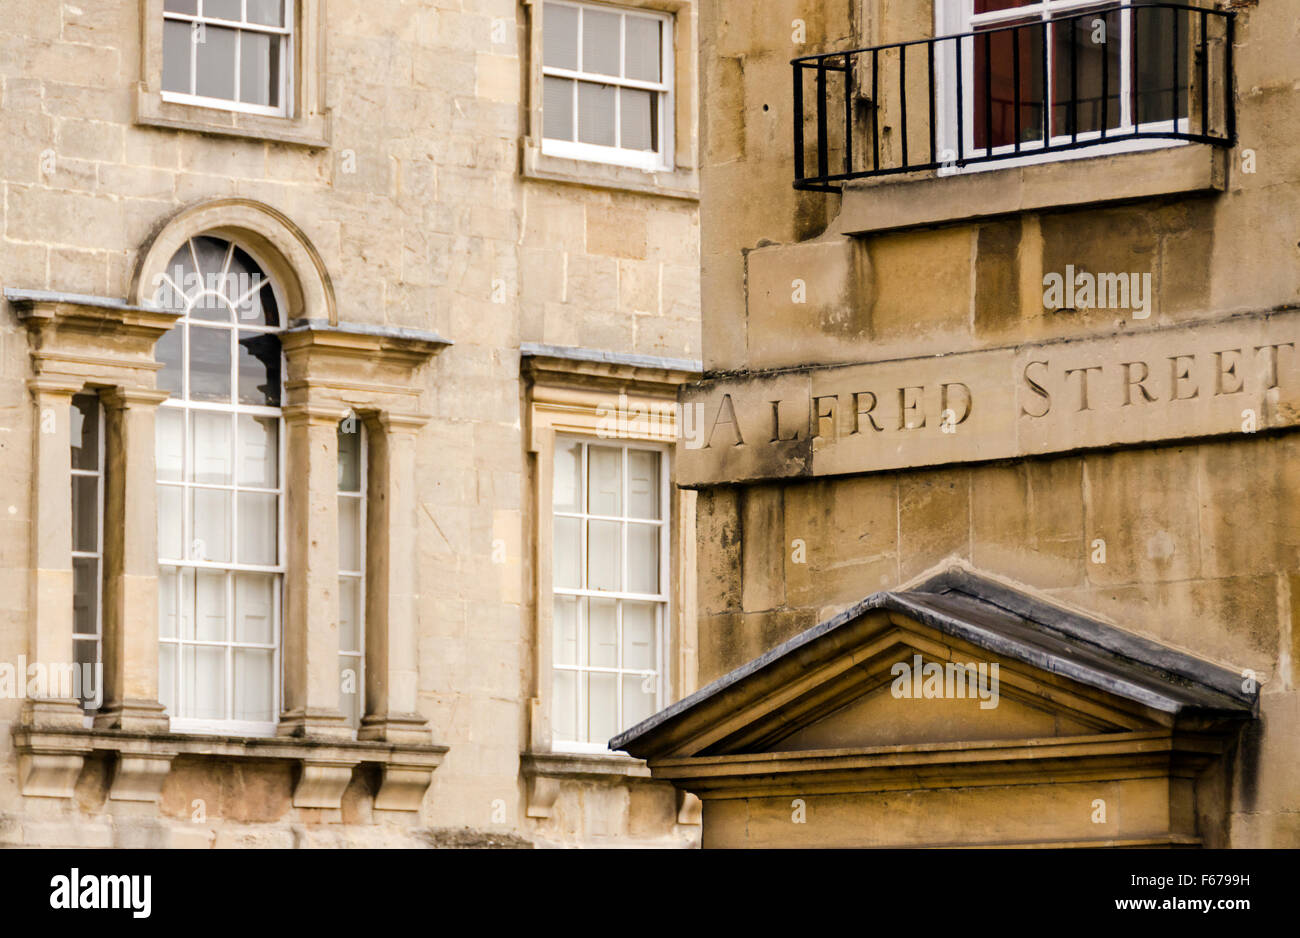 Street sign for Alfred Street carved into Cotswold sandstone in Bath England Stock Photo